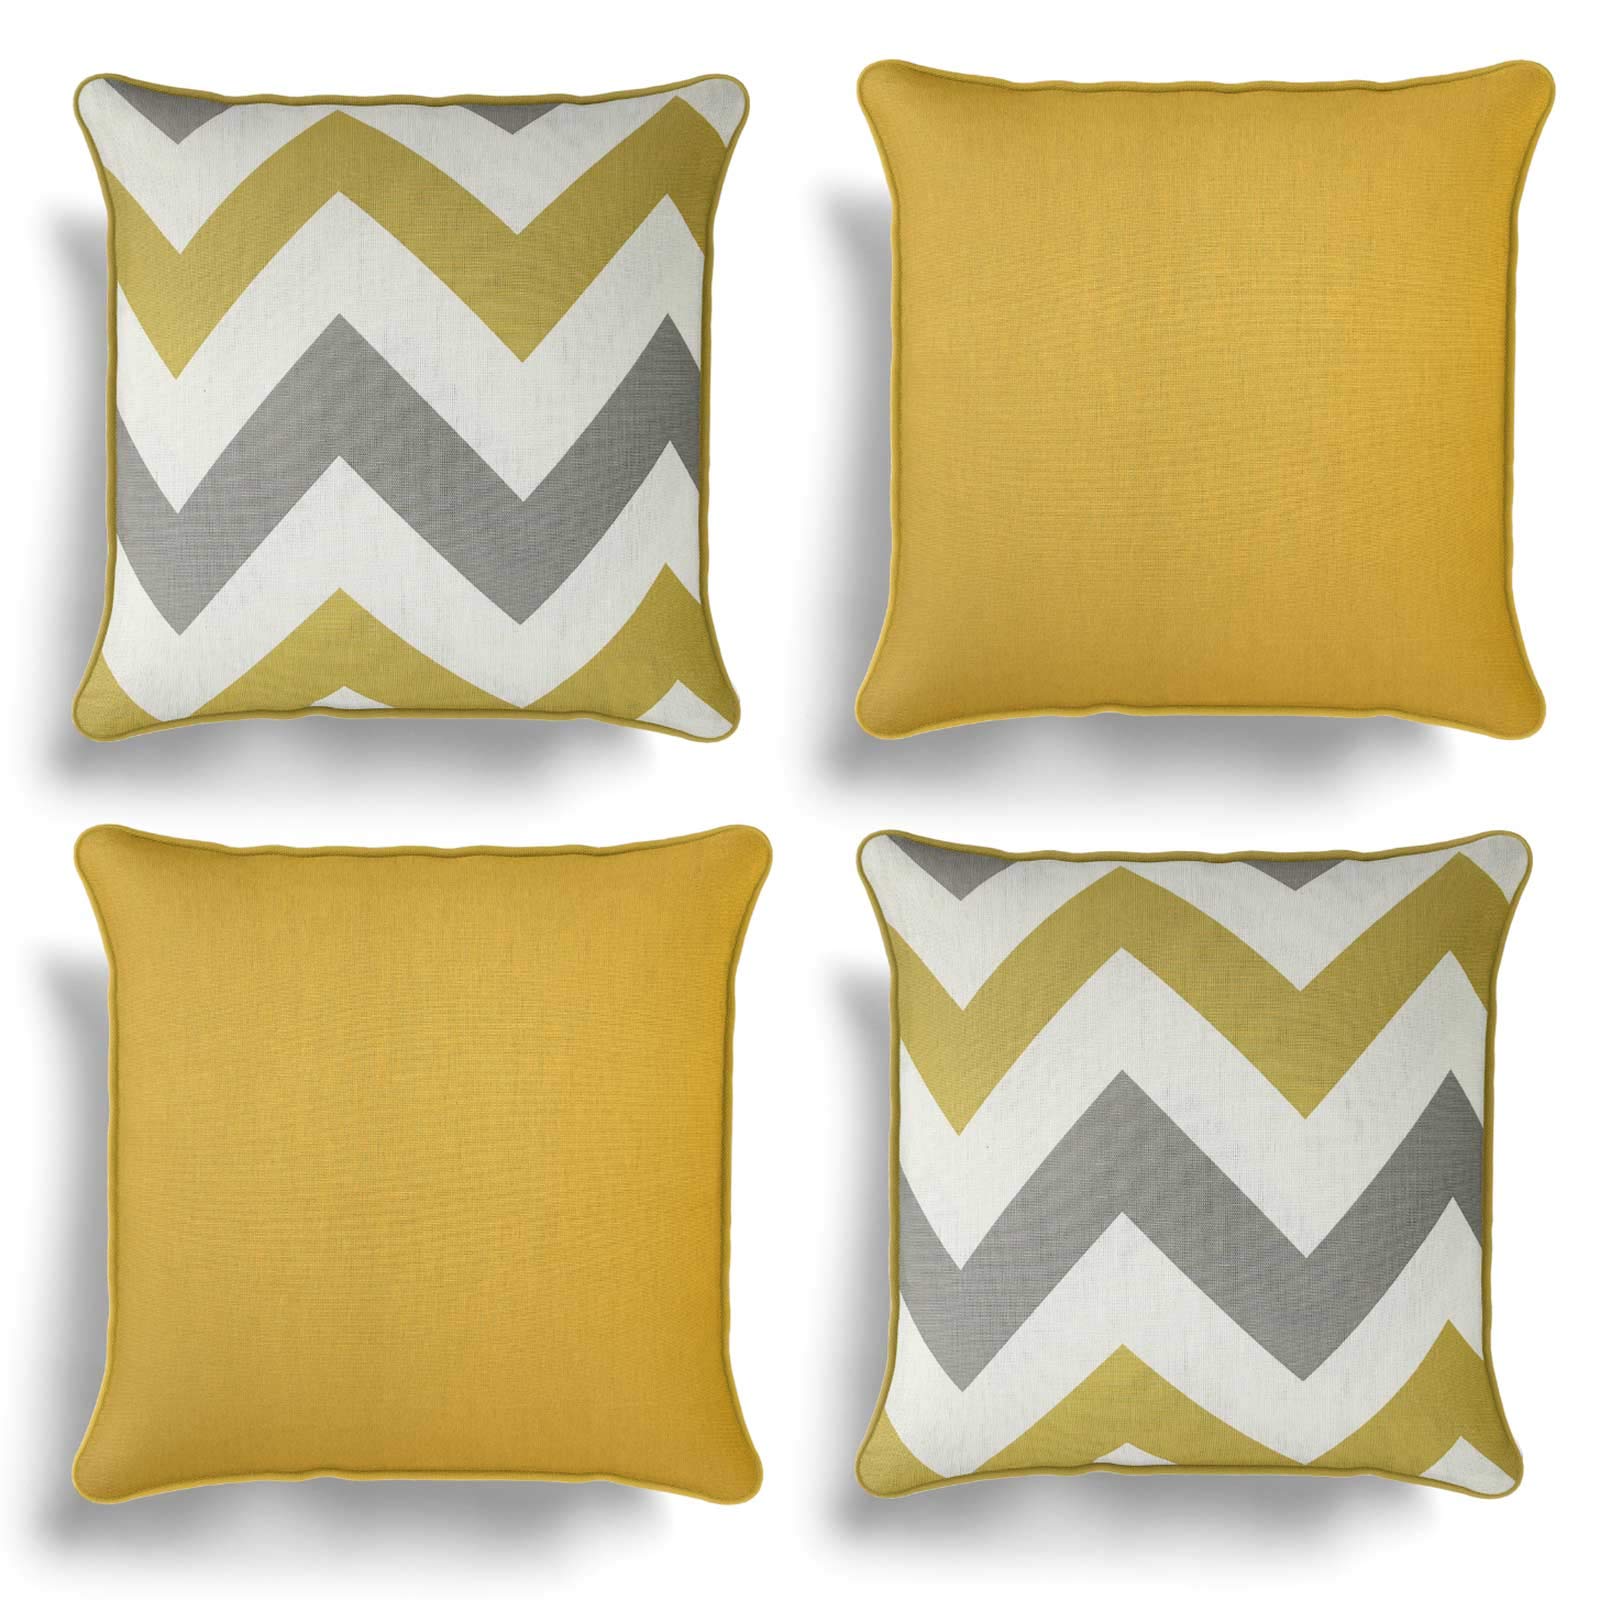 Set of 4 Ochre Yellow Cushion Covers, Pack of Four Matching Chevron Stripe and Plain Design Cotton Cushion Covers, Piped Trim Cushion Cases, Sofa Chair Throw Pillow Cases, 17" x 17", 43cm x 43cm